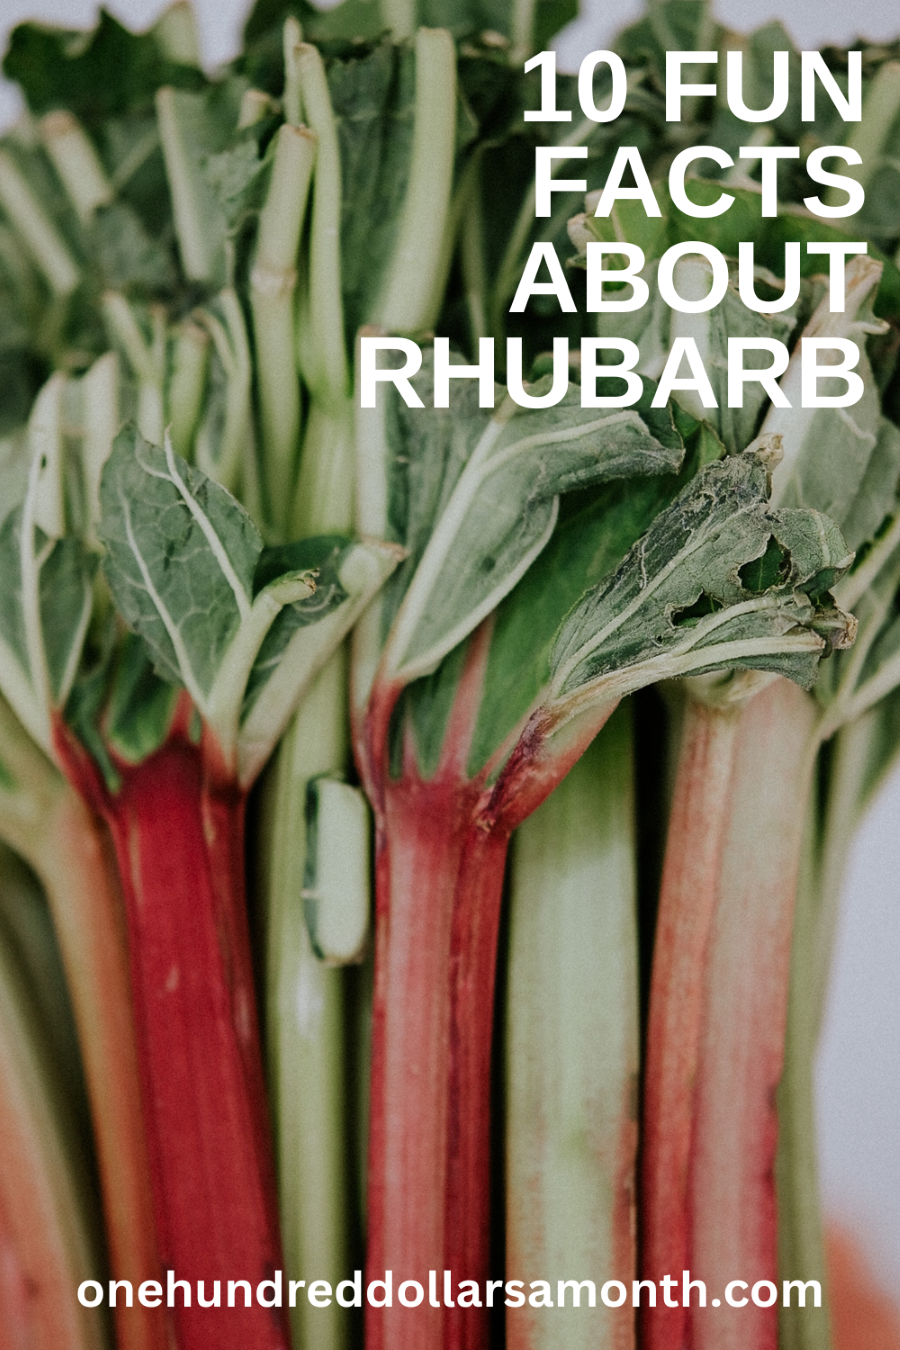 10 Fun Facts About Rhubarb